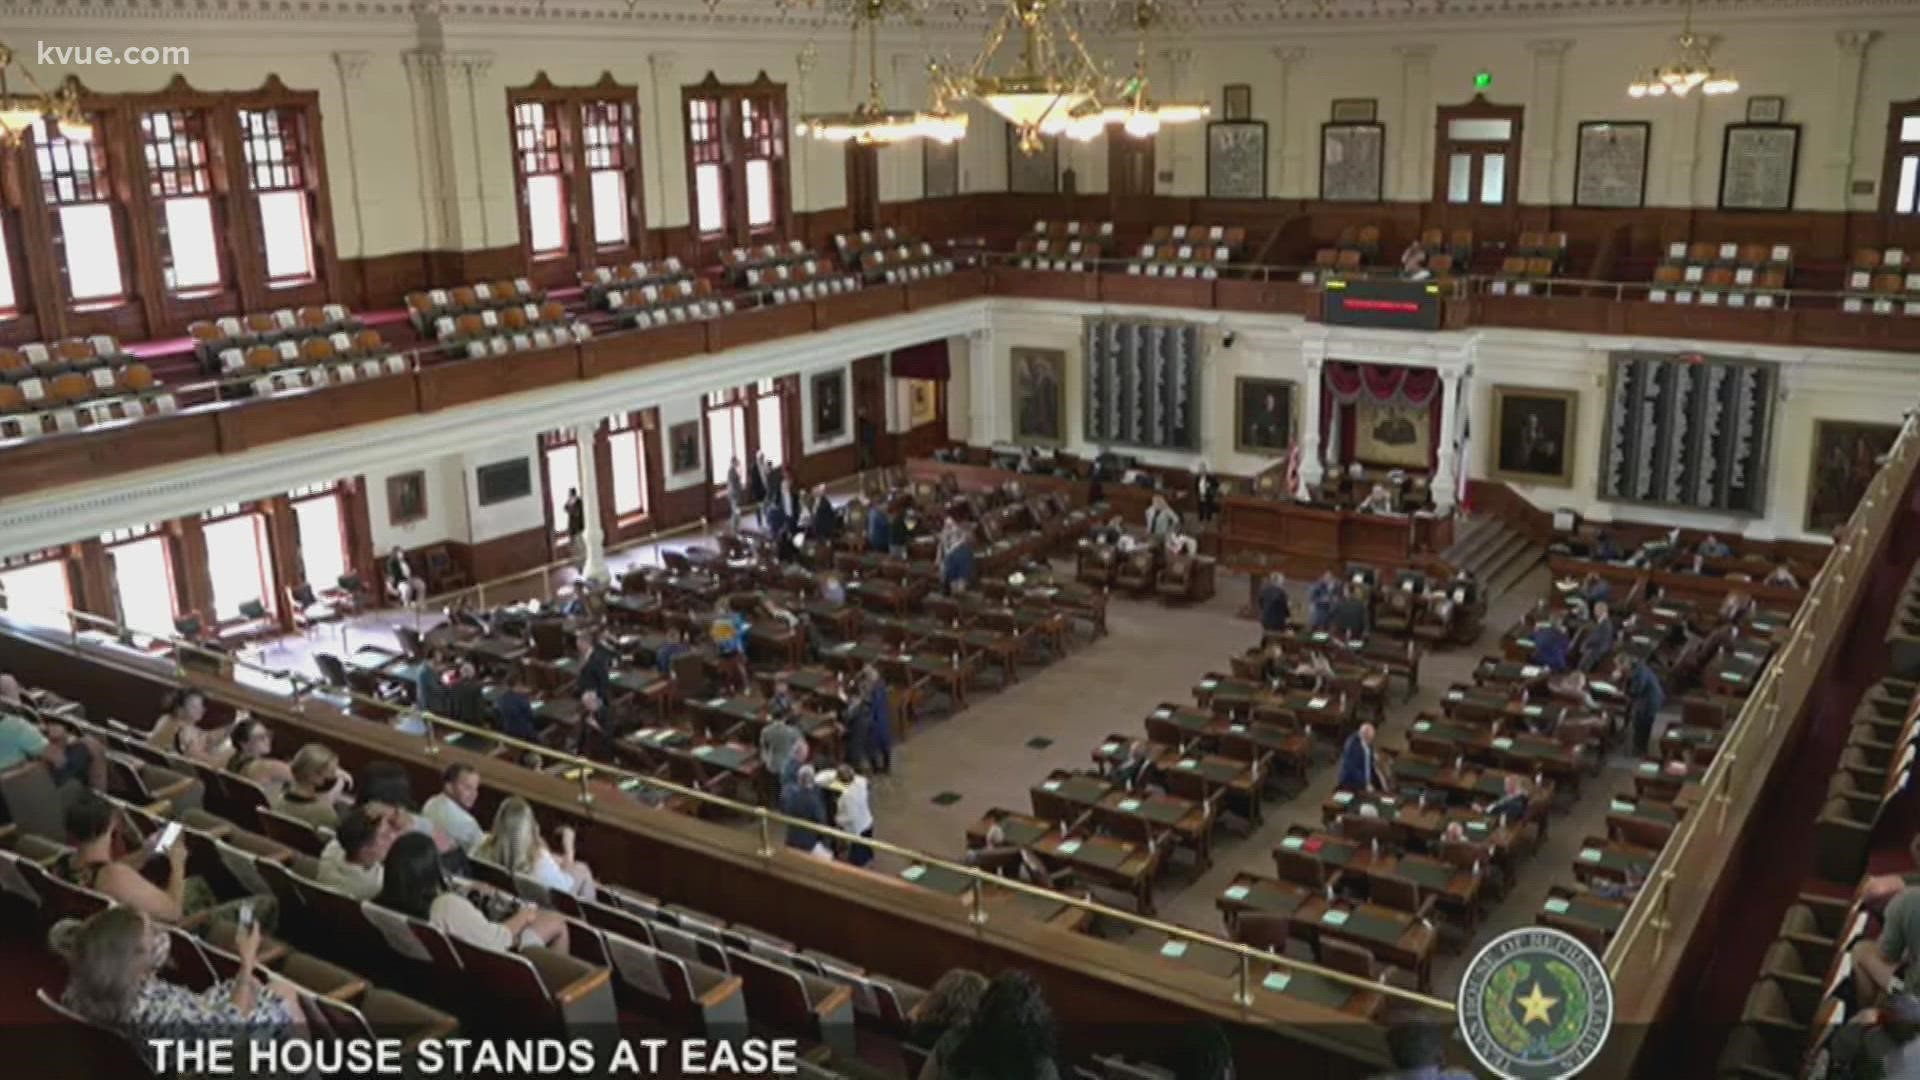 If six more state representatives make it to the State Capitol Monday, the Texas State House will meet quorum and be able to conduct business.